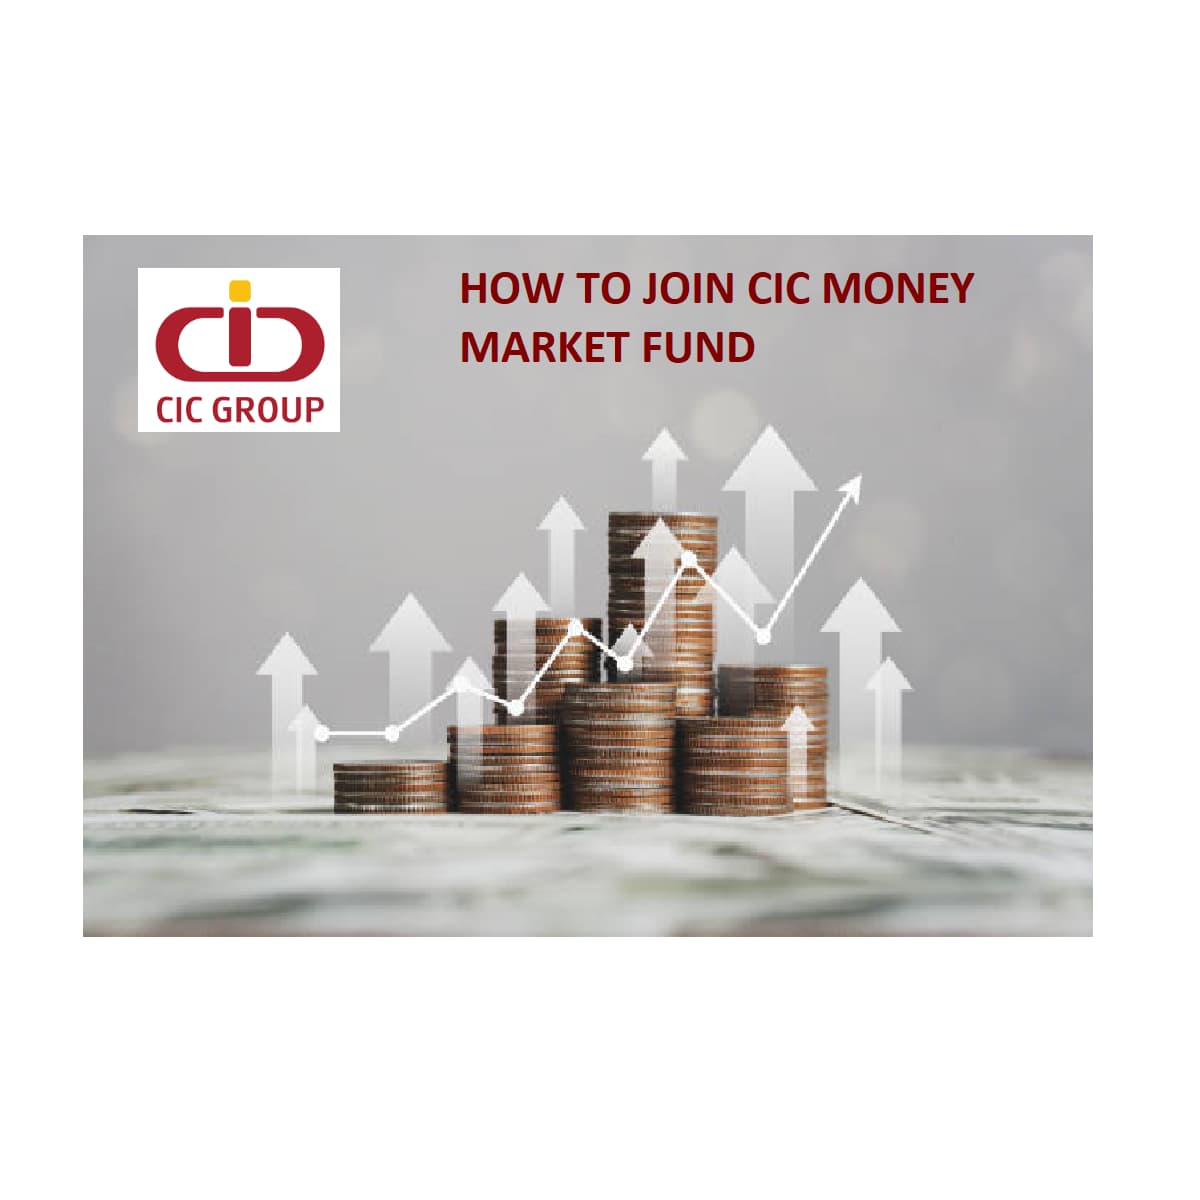 How to Join CIC Money Market Fund